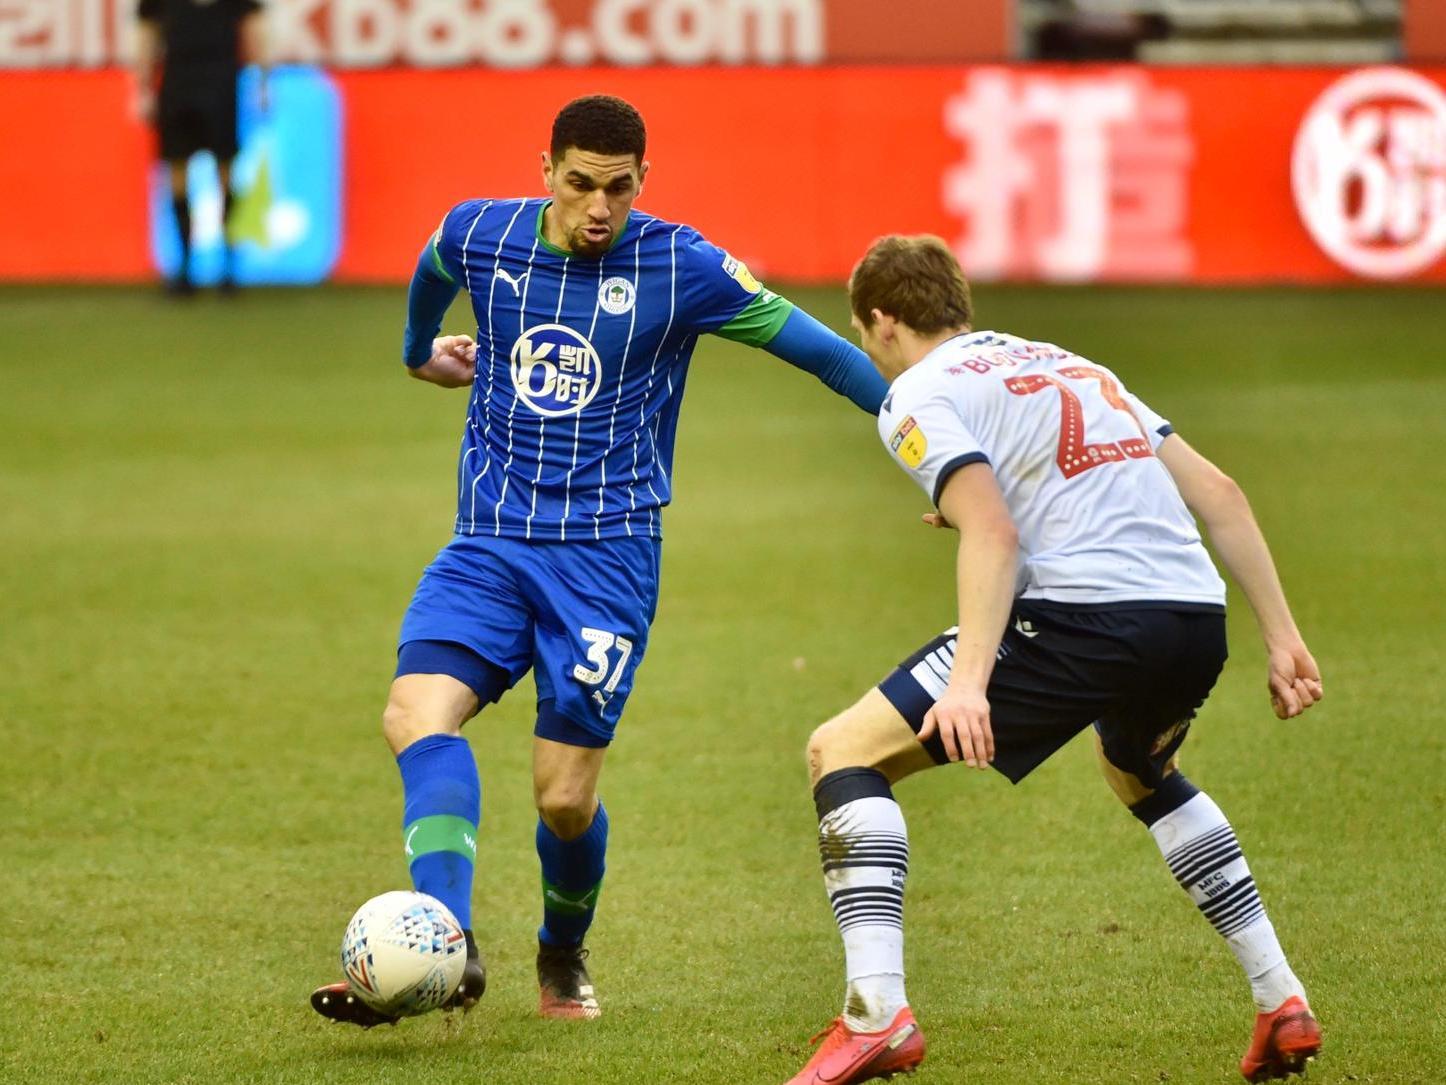 Leon Balogun: 9 - Impressive enough display at the back, even more so given he was under the weather and was sick at half-time